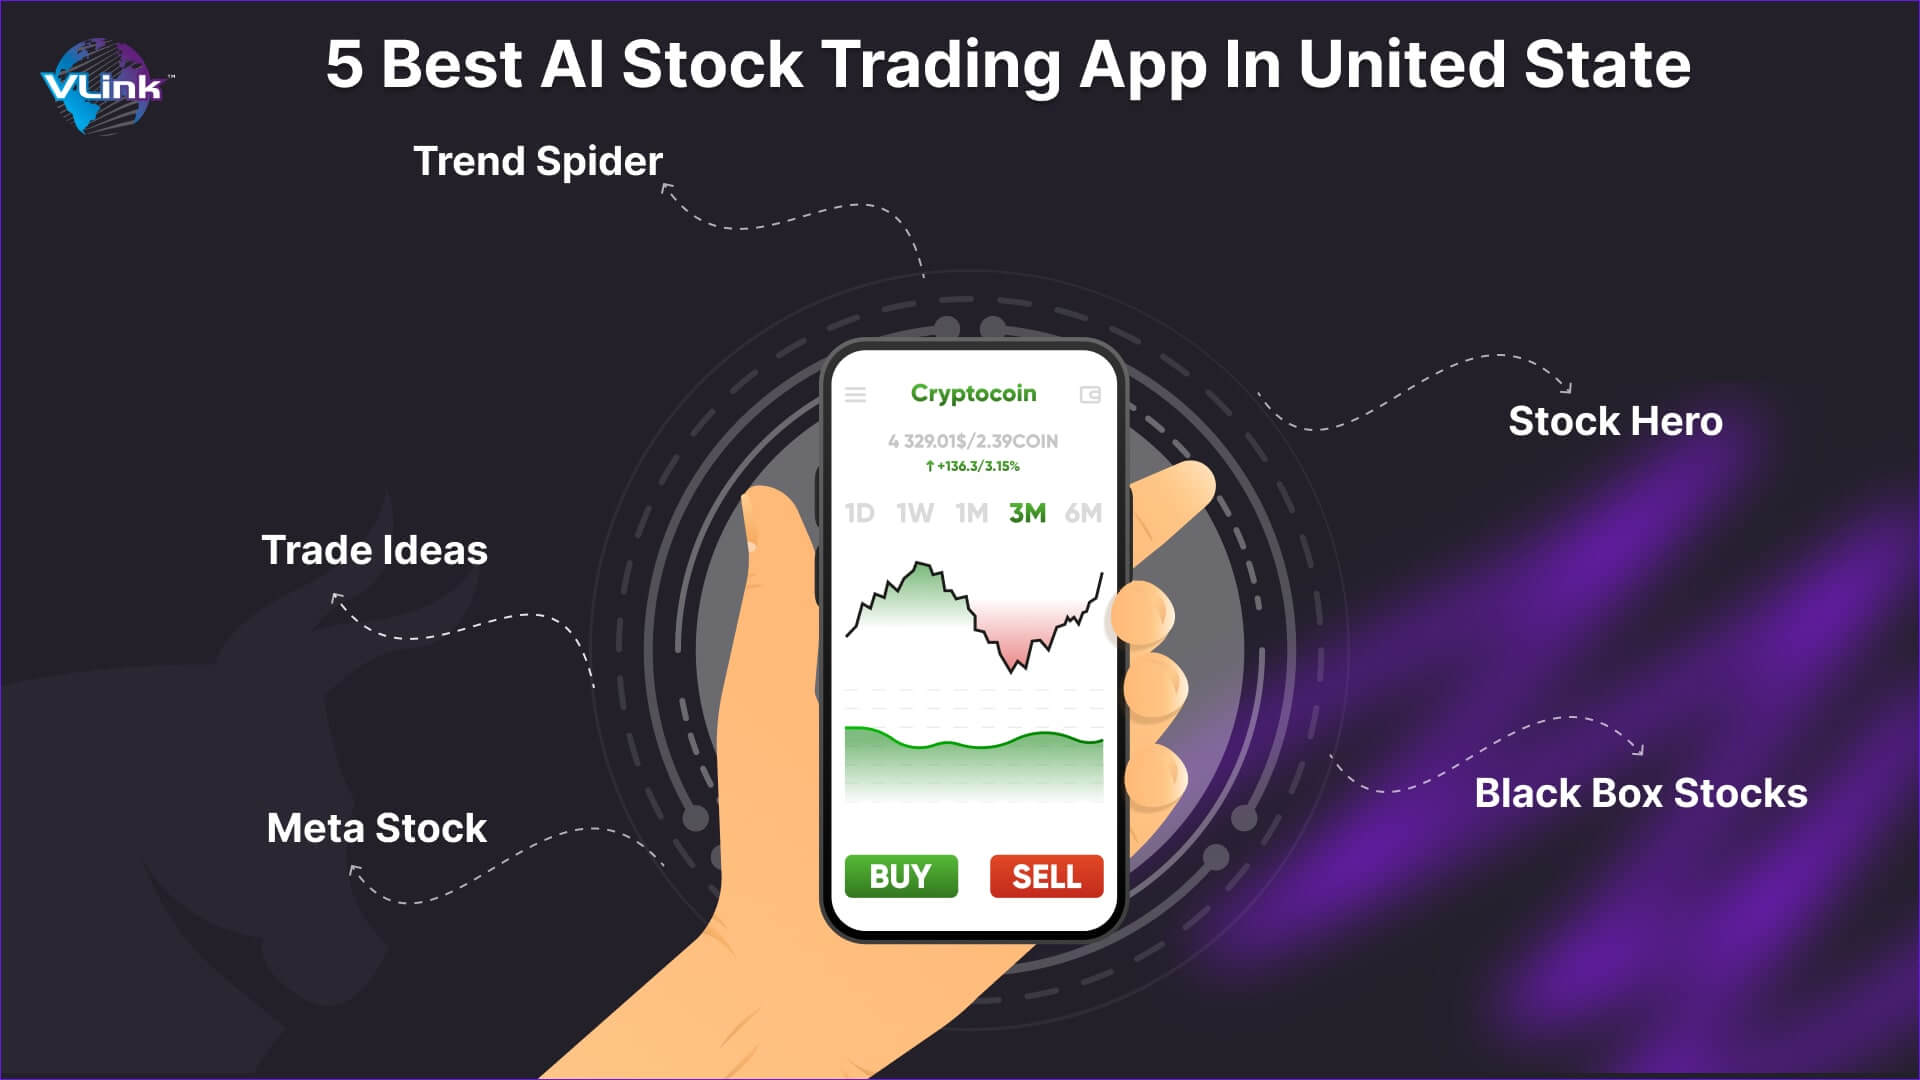 Top 5 popular AI-enabled stock trading apps in the United States